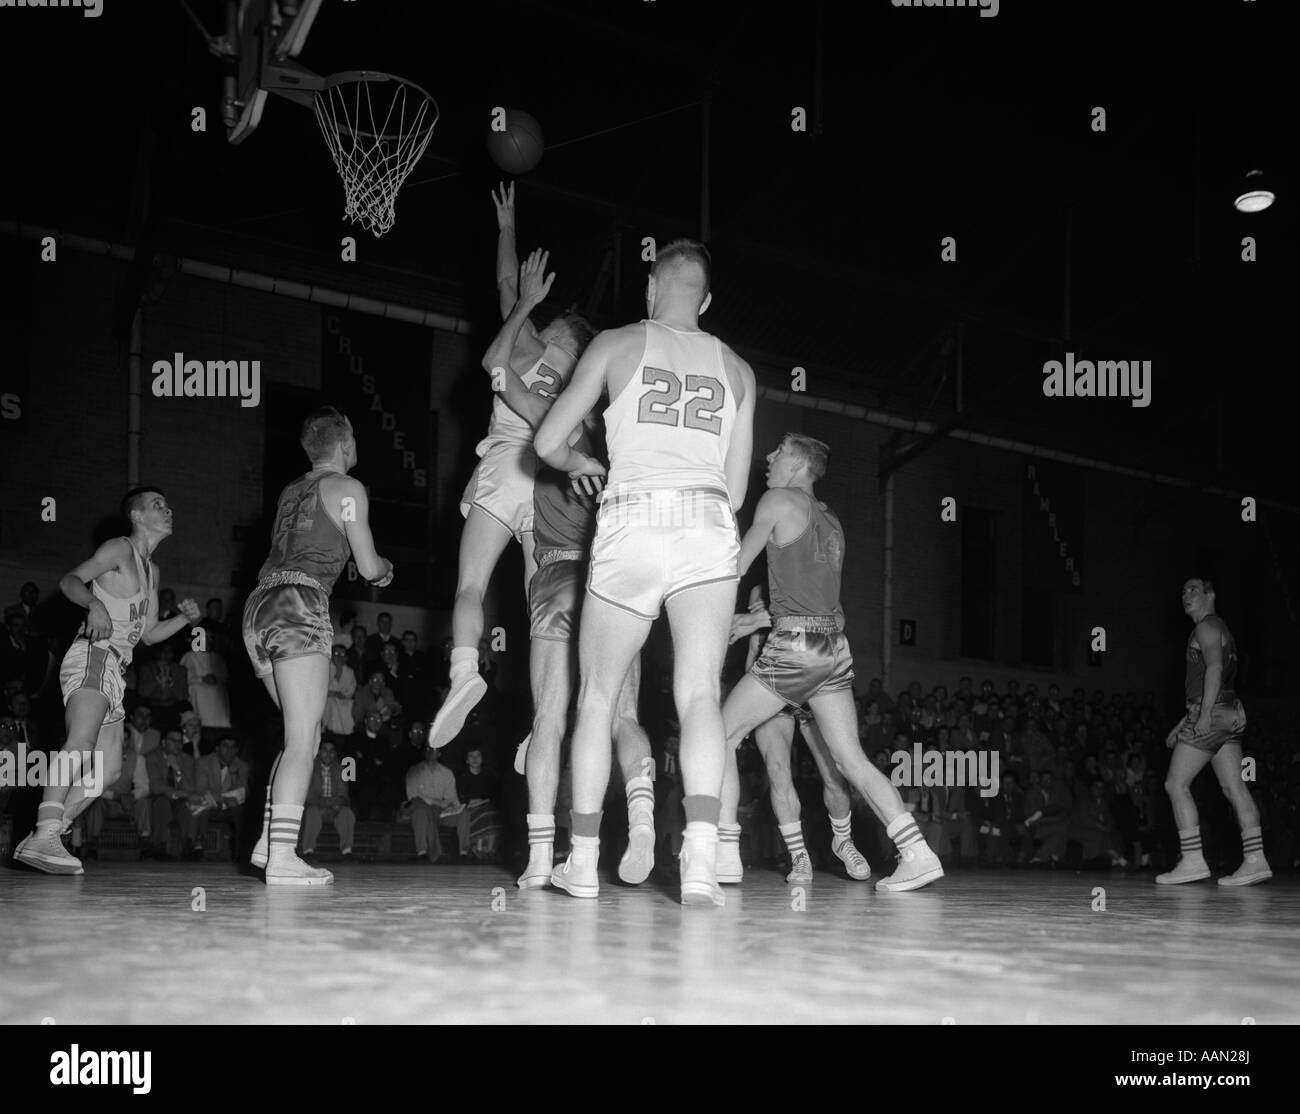 1950s BOYS' BASKETBALL GAME INDOORS BOY JUMPING Stock Photo